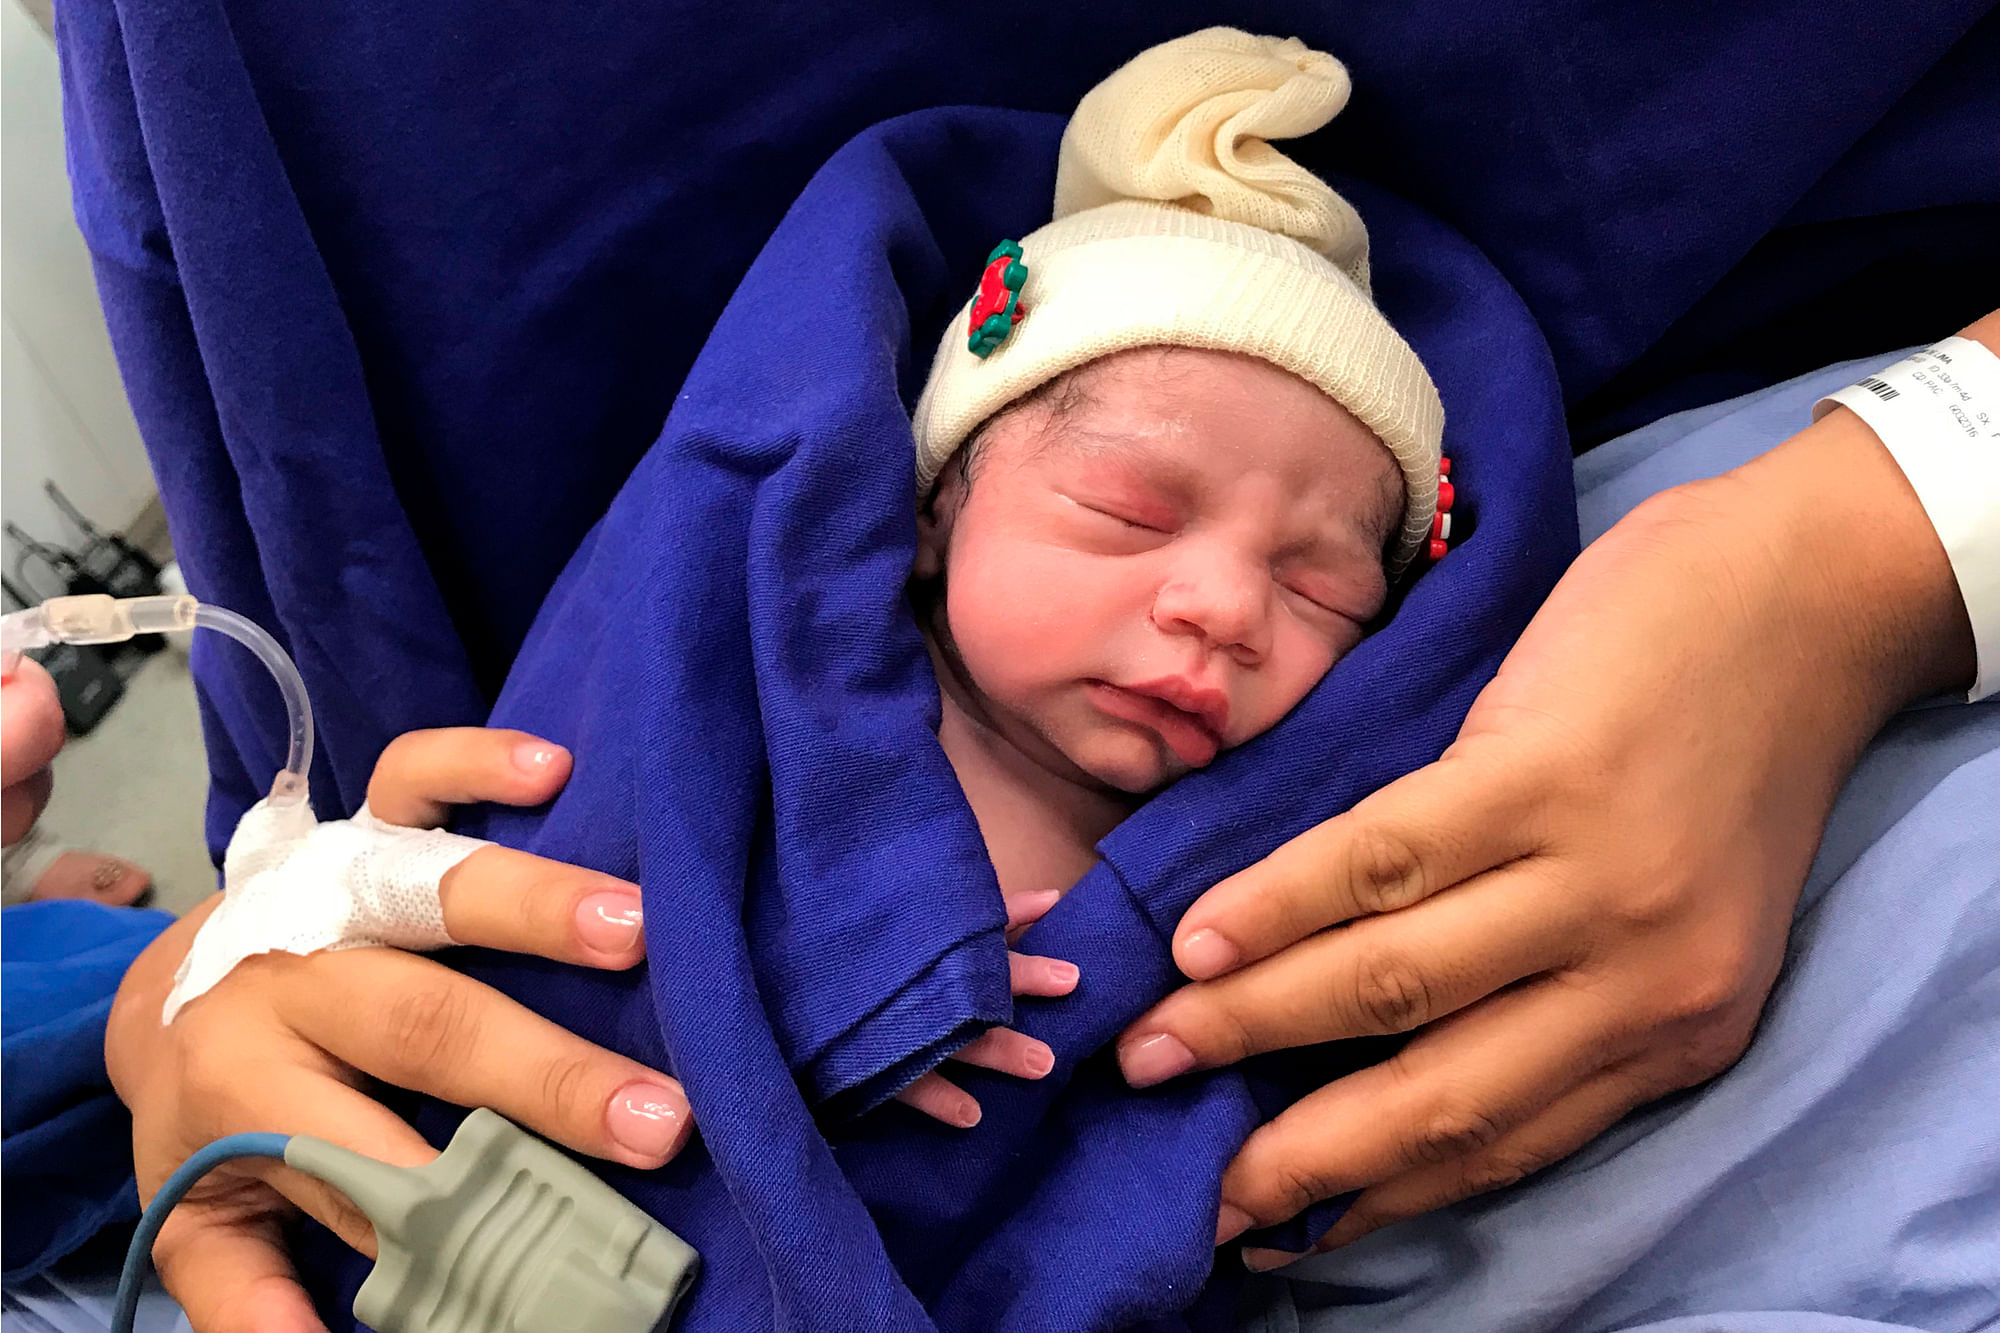 This Dec. 15, 2017 photo provided by transplant surgeon Dr. Wellington Andraus shows the baby girl born to a woman with a uterus transplanted from a deceased donor at the Hospital das Clinicas of the University of Sao Paulo School of Medicine, Sao Paulo, Brazil 